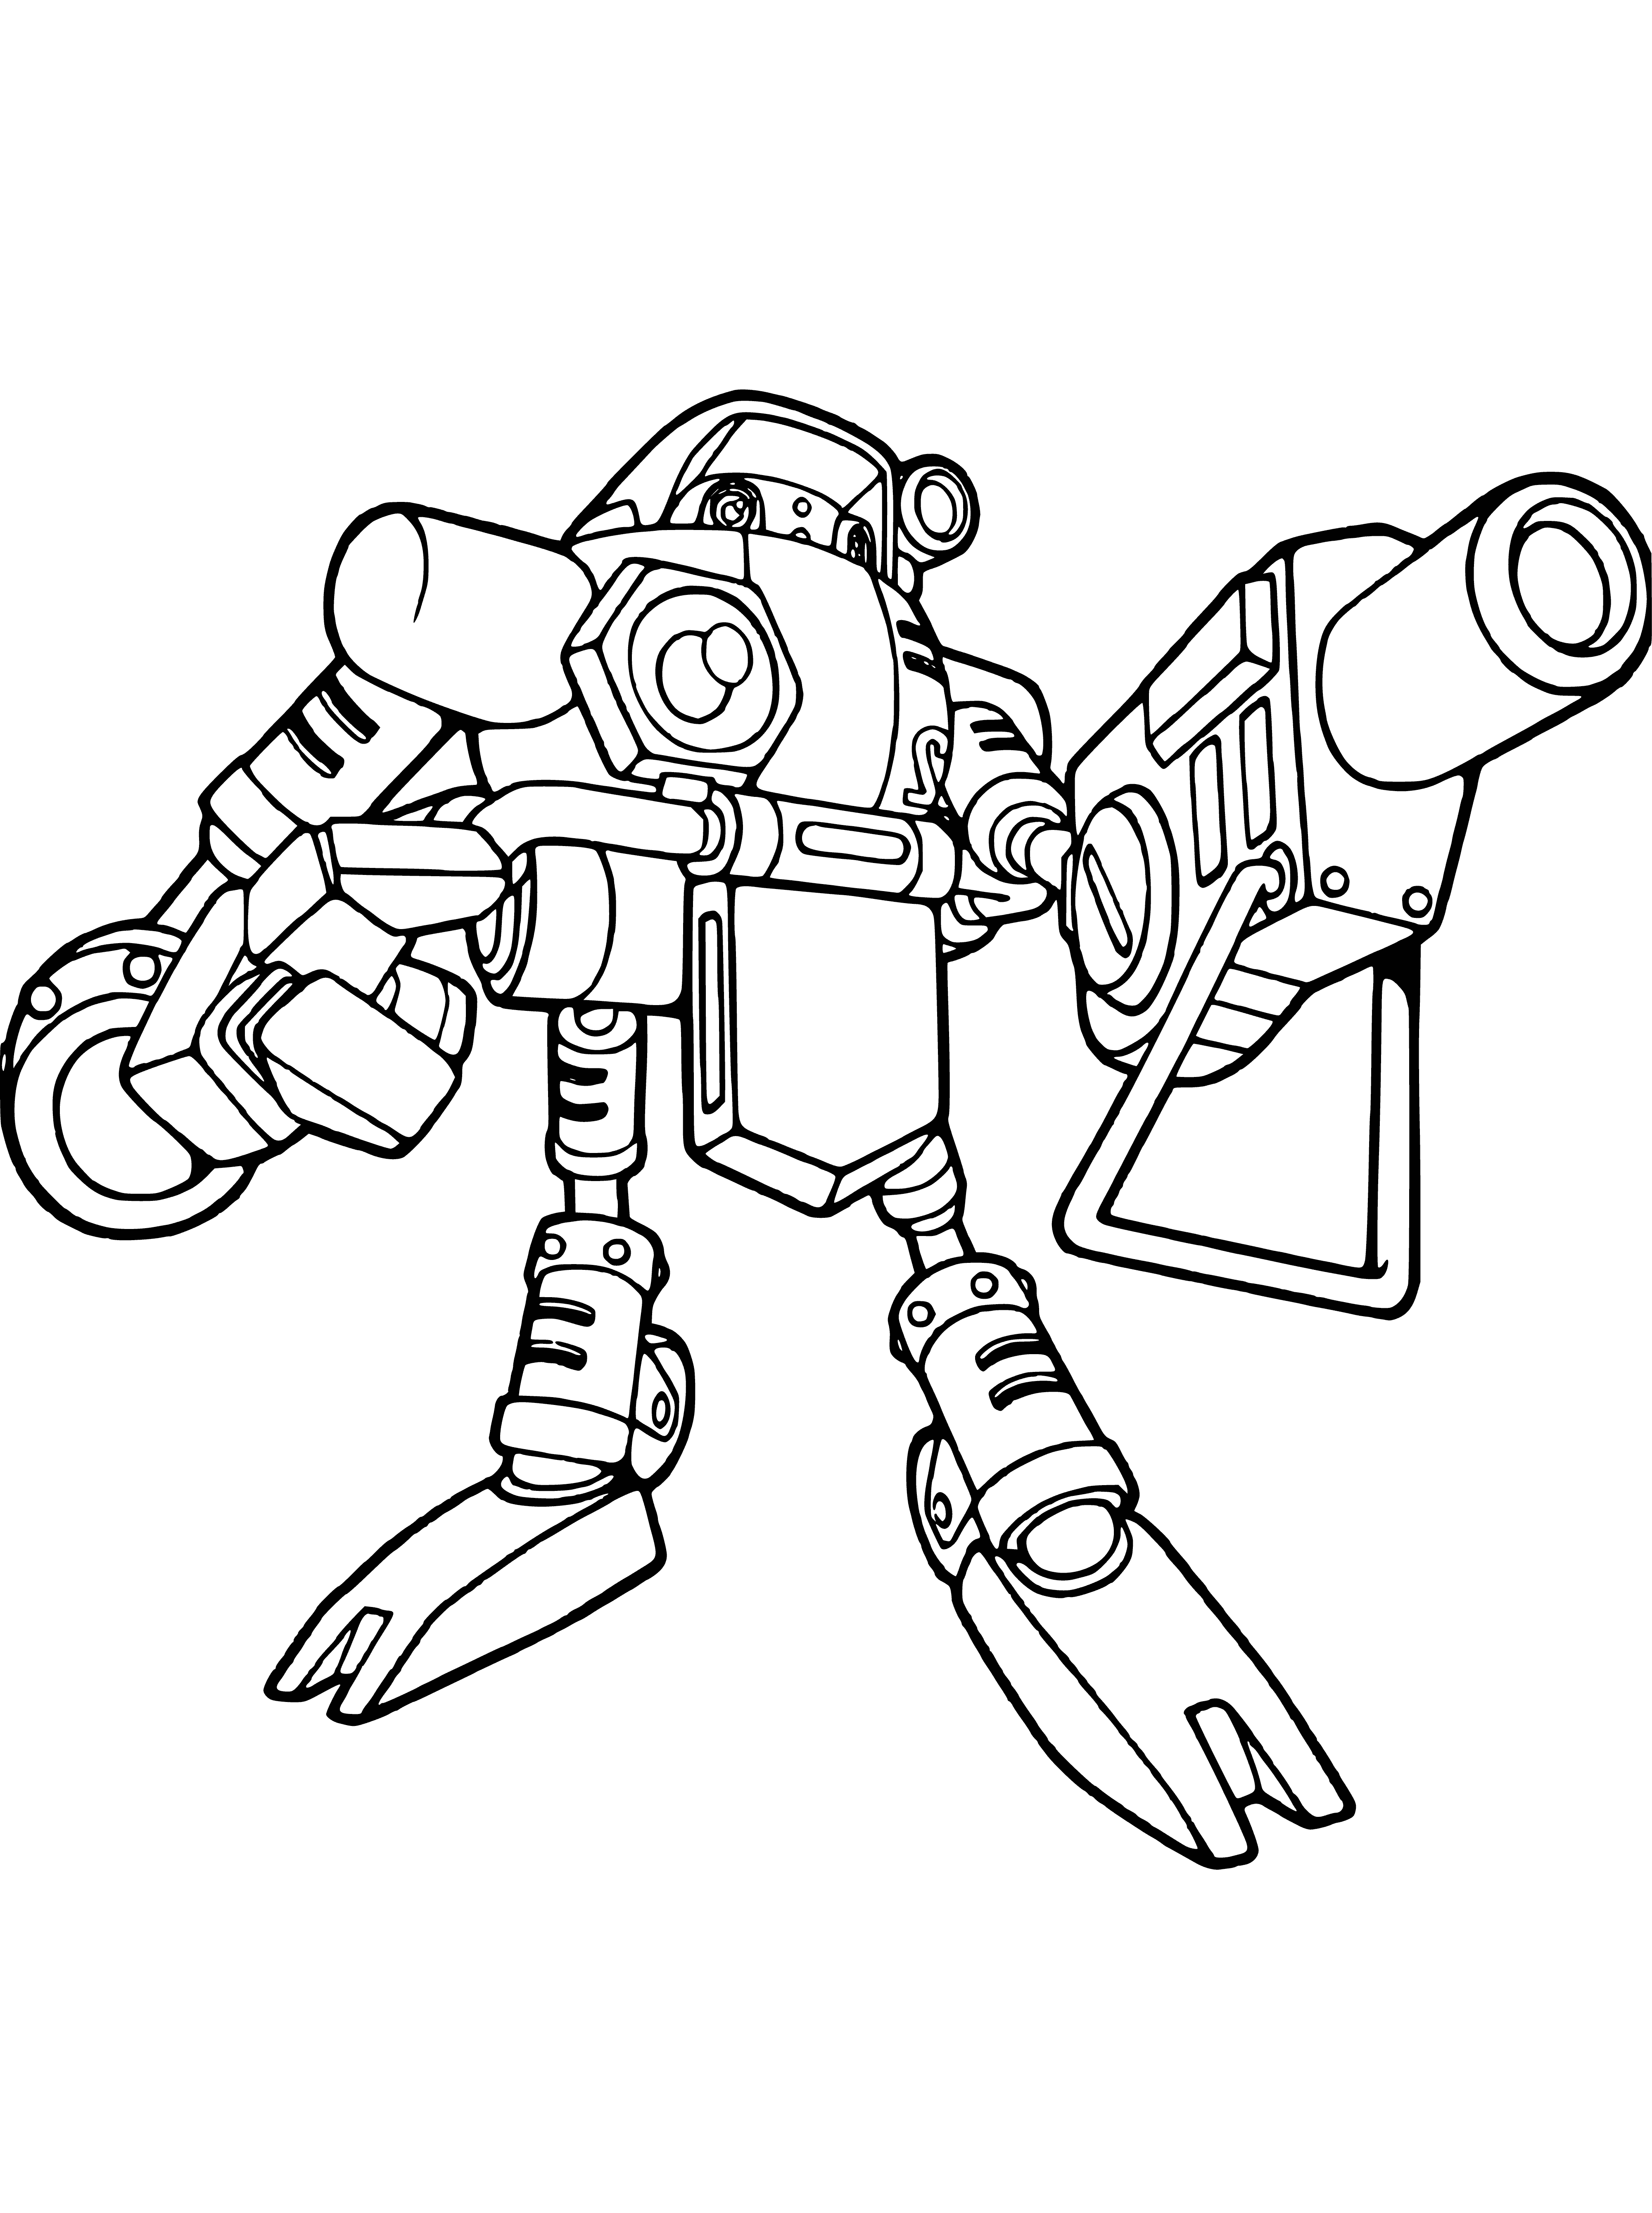 coloring page: Robot with round head, long cylindrical body, red eyes, thin mouth, two arms and purple armor.